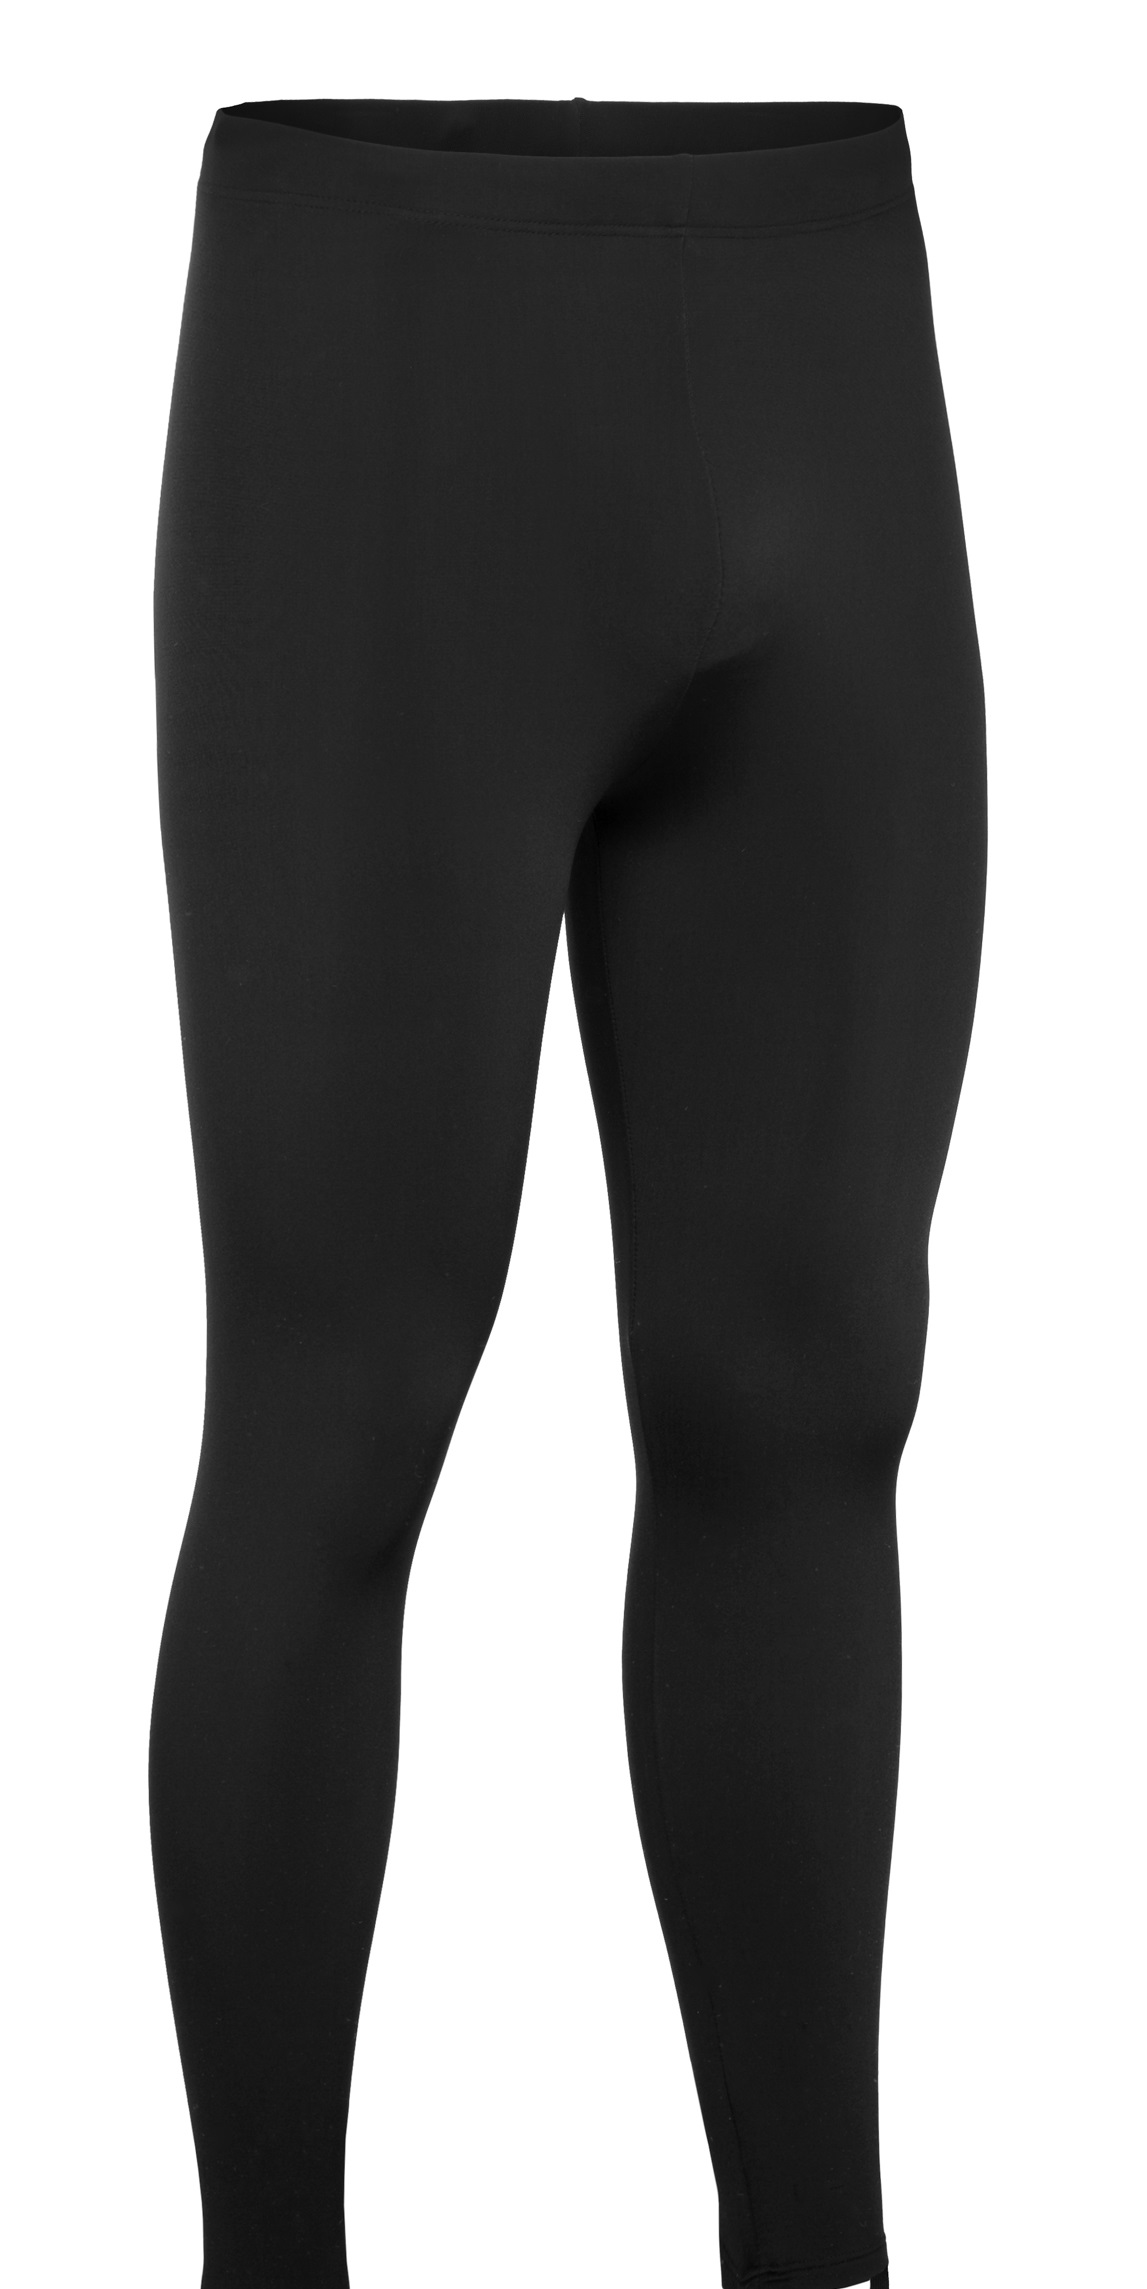 Clothing for cold weather Lycra Fleece Thermal Pants